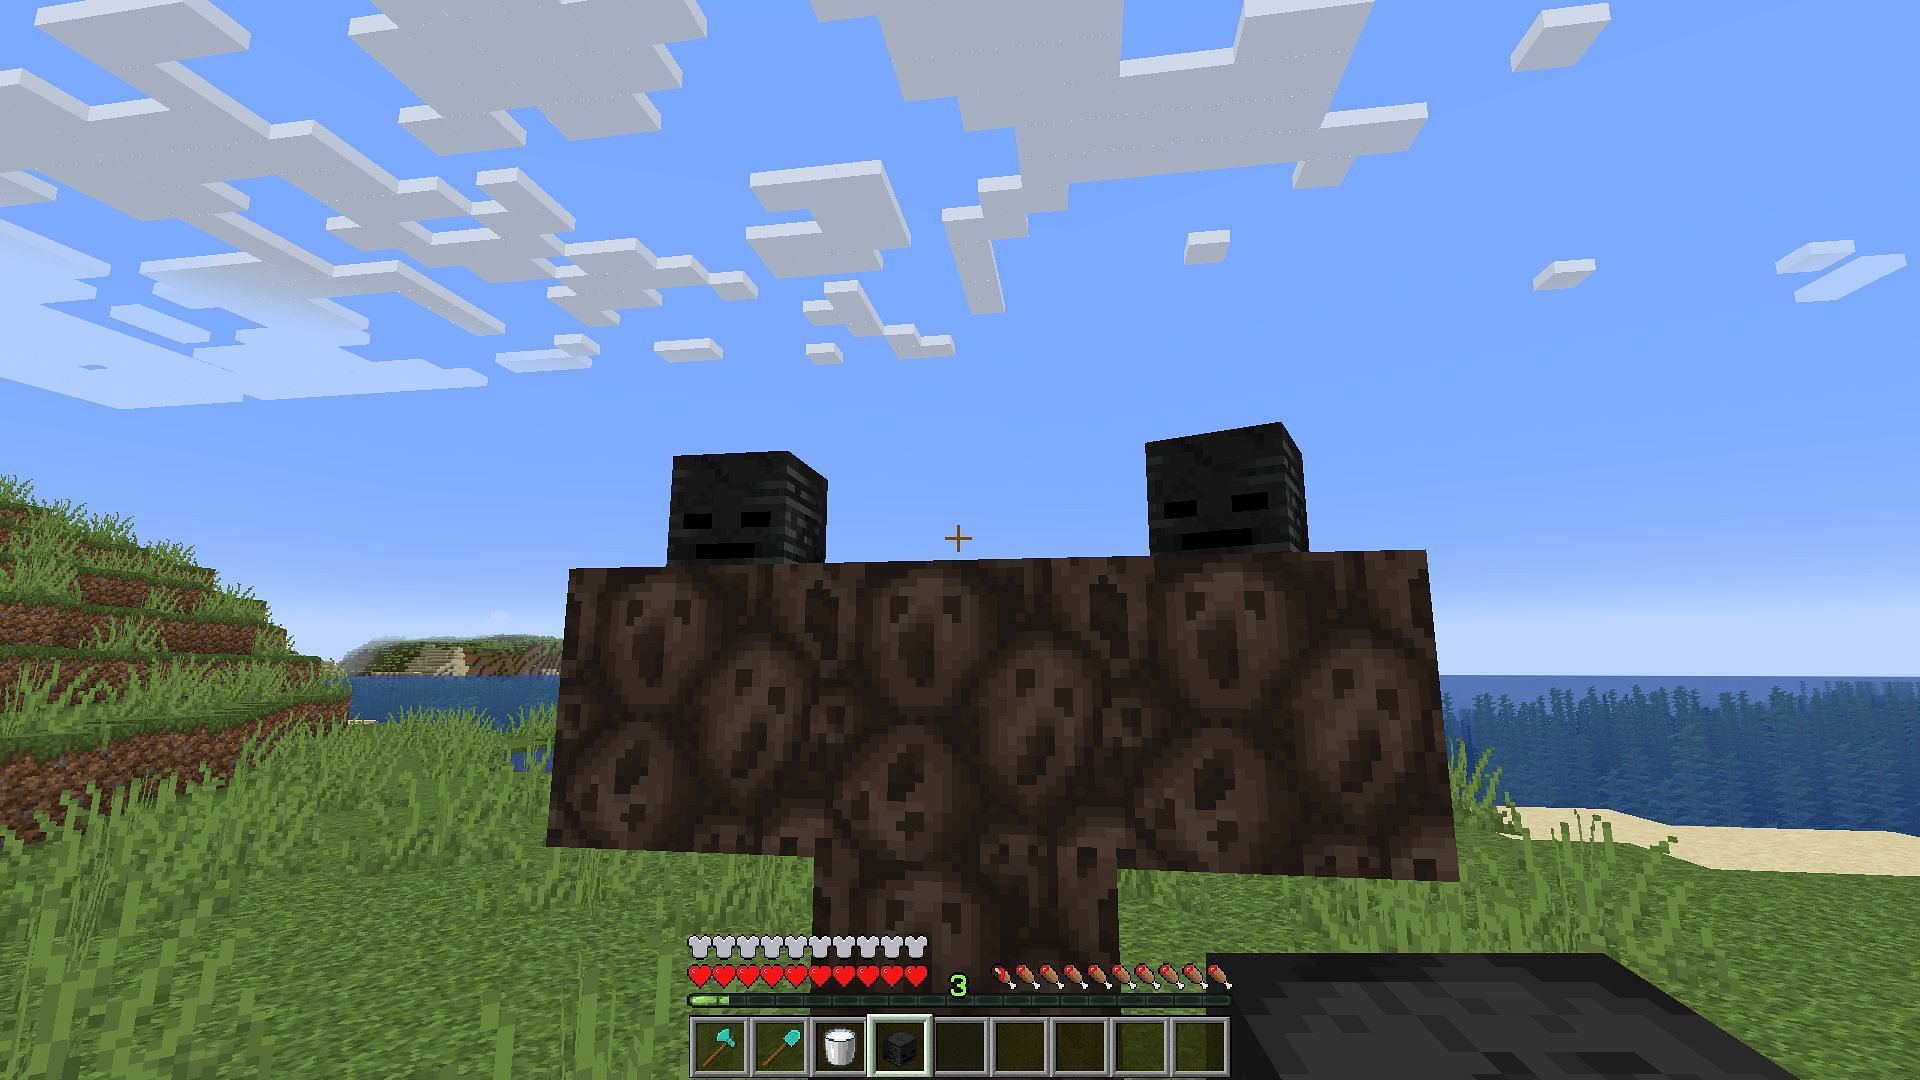 A player goes to summon the Wither with milk at the ready (Image via Minecraft)